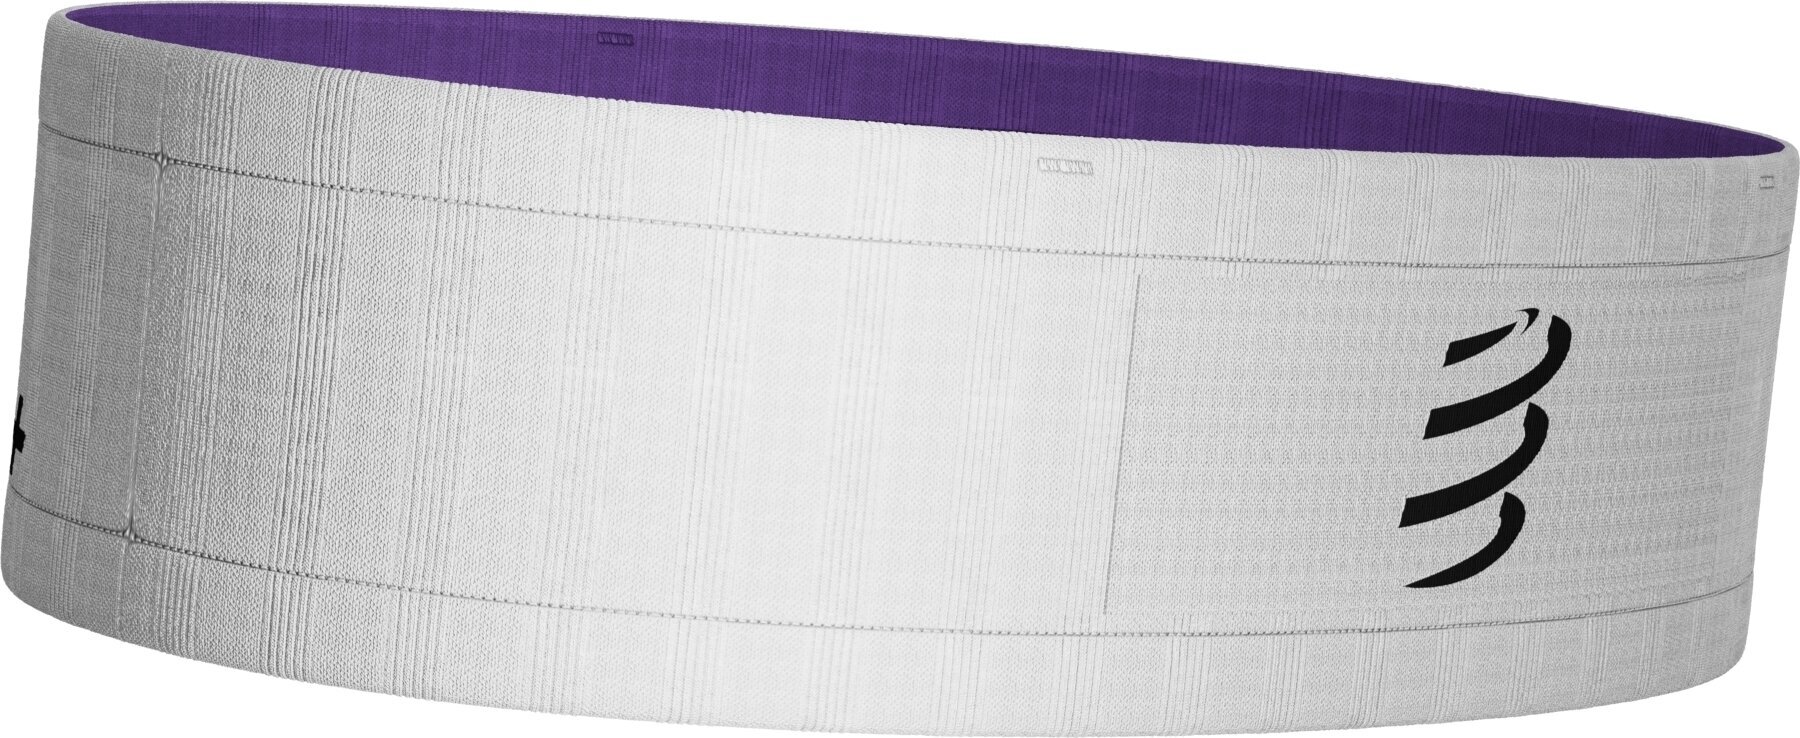 Hardloophoes Compressport Free Belt White/Royal Lilac XS/S Hardloophoes